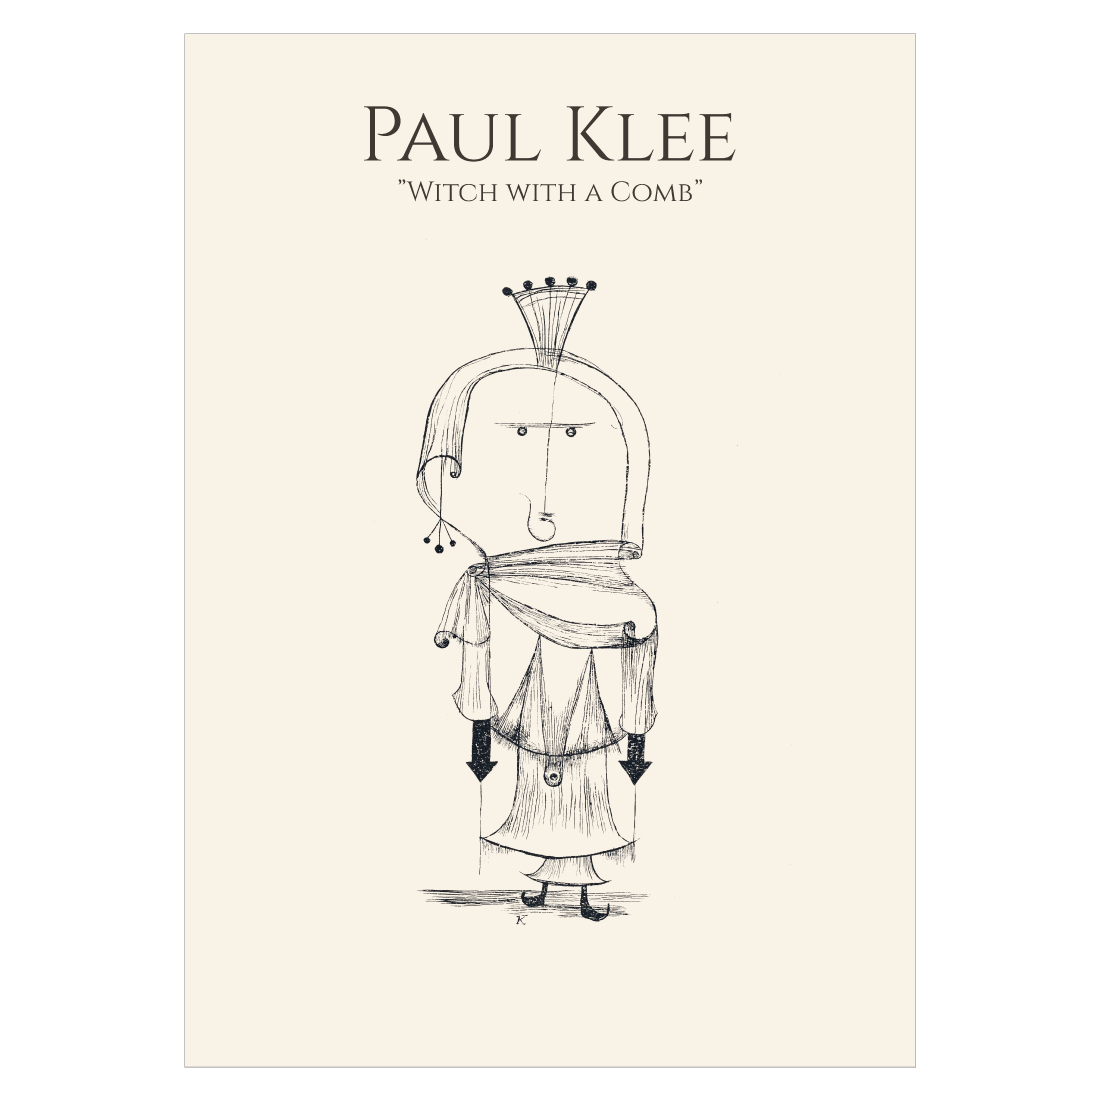 Kunstplakat med Paul Klees "Wich with a comb"